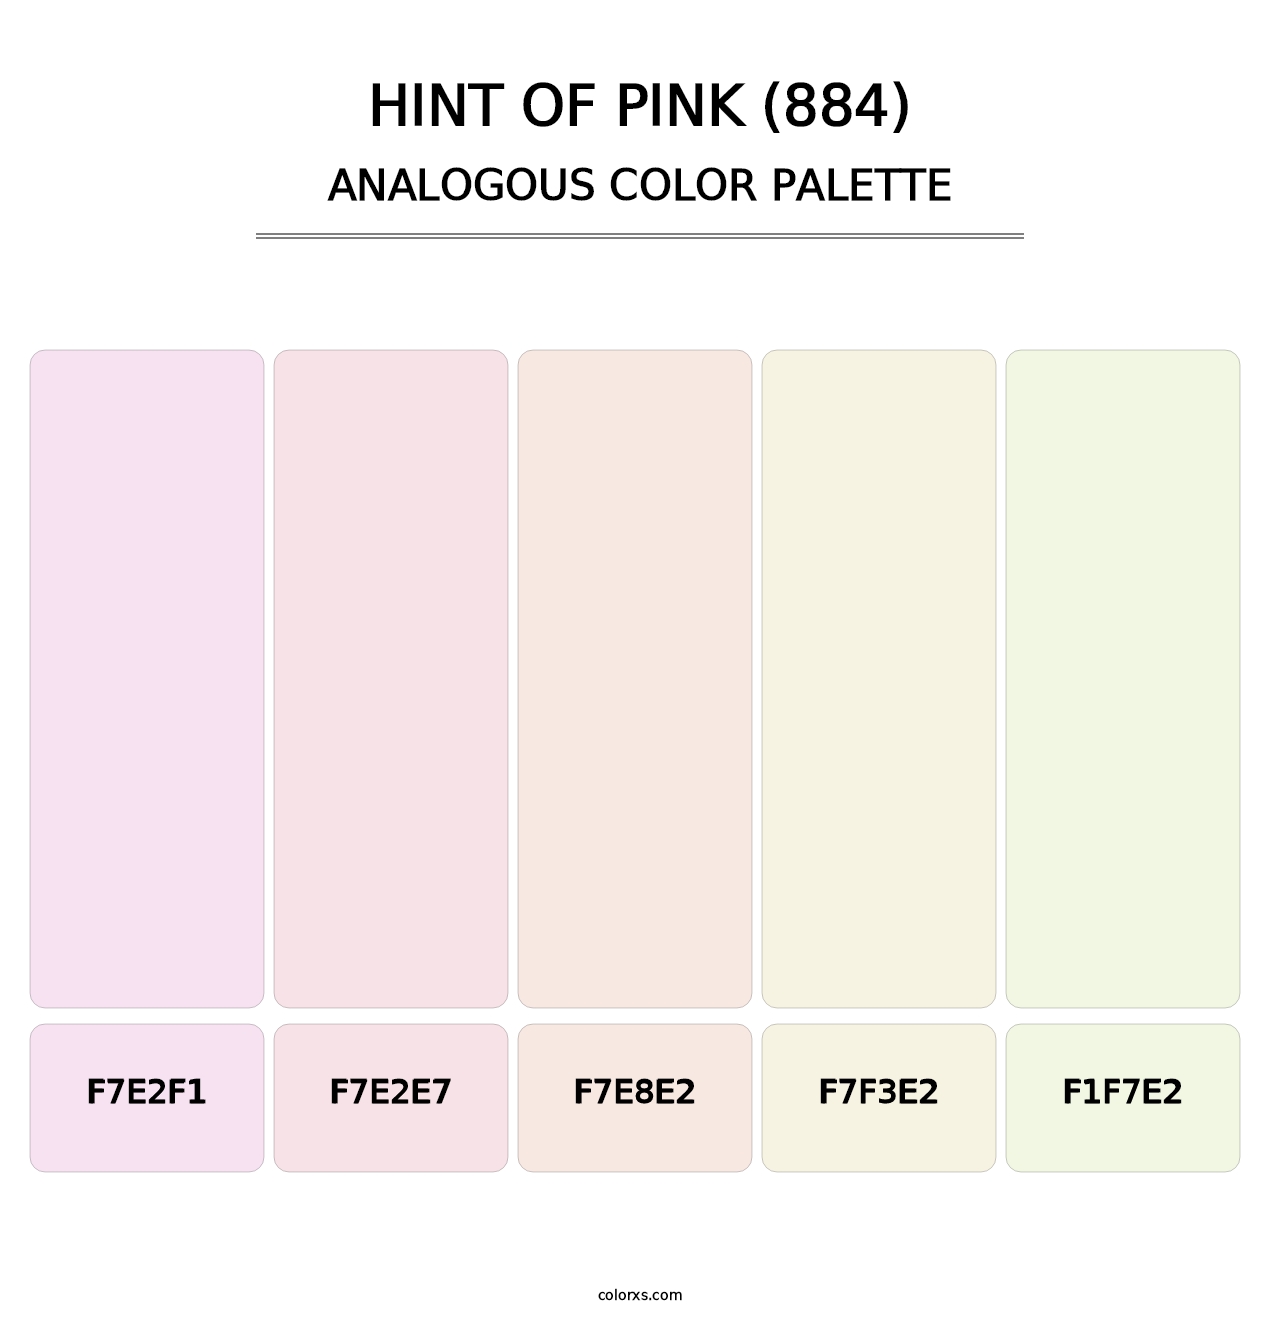 Hint of Pink (884) - Analogous Color Palette